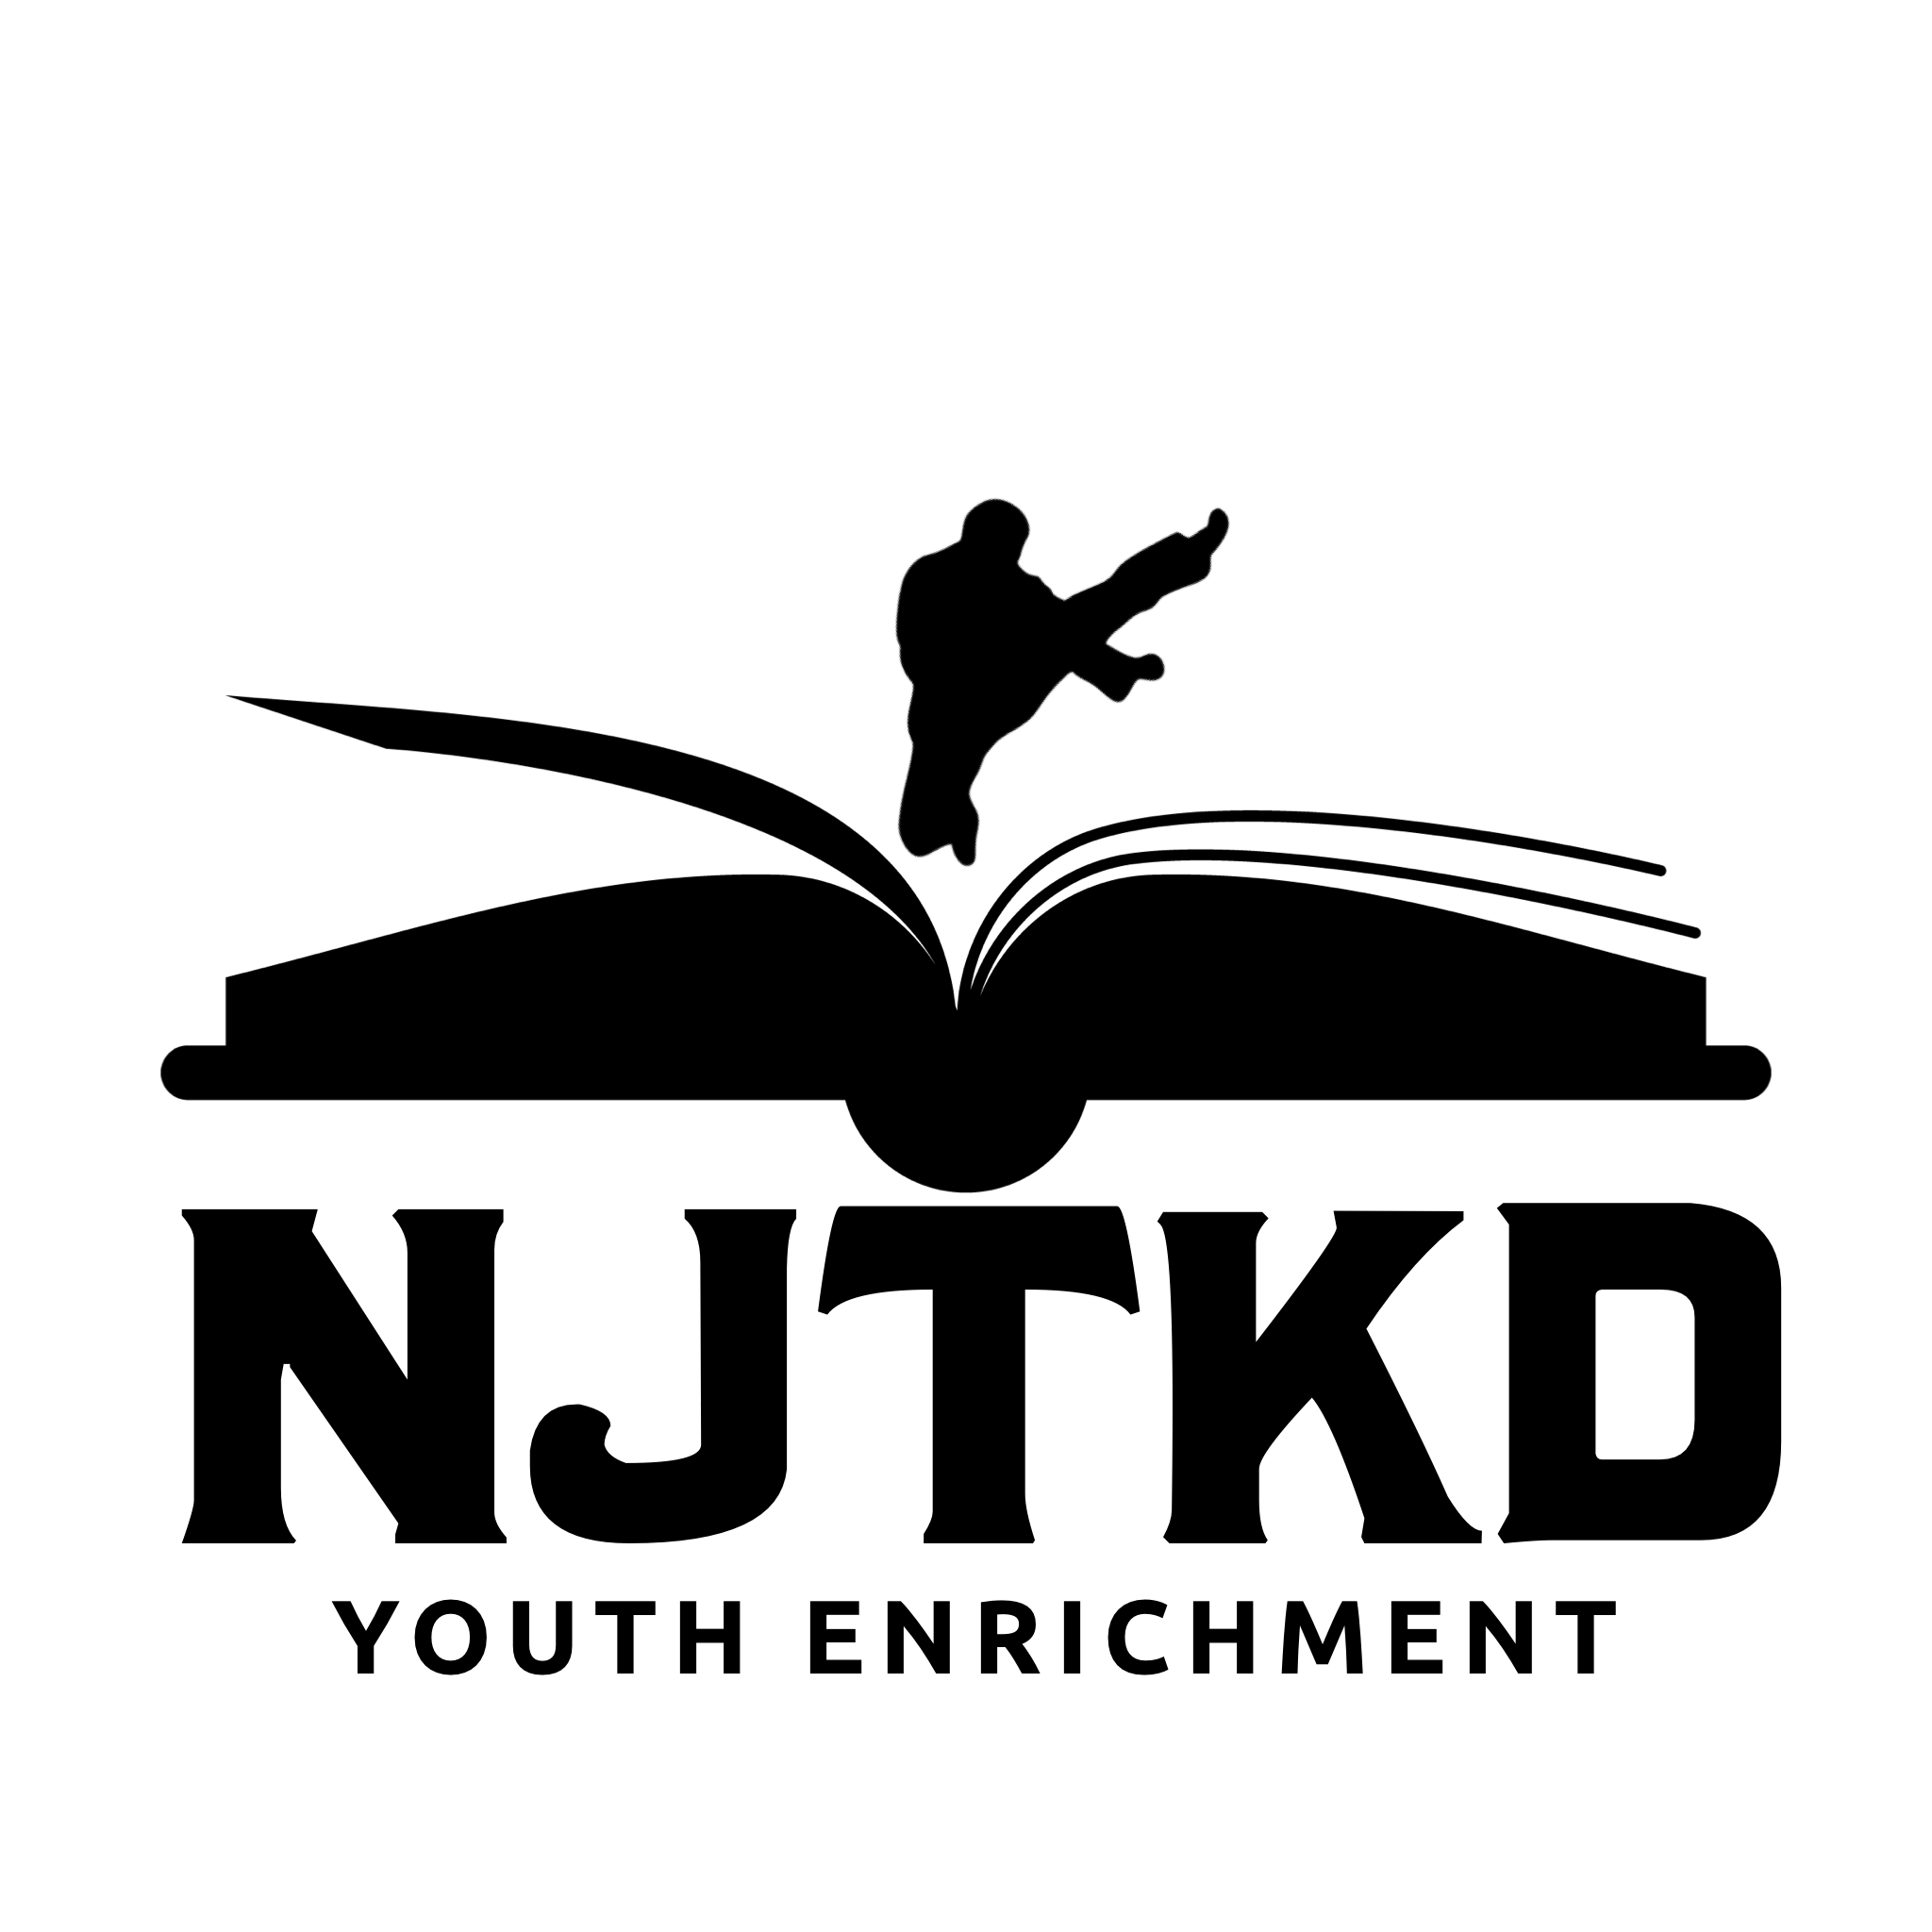 NJ TKD FOR YOUTH ENRICHMENT